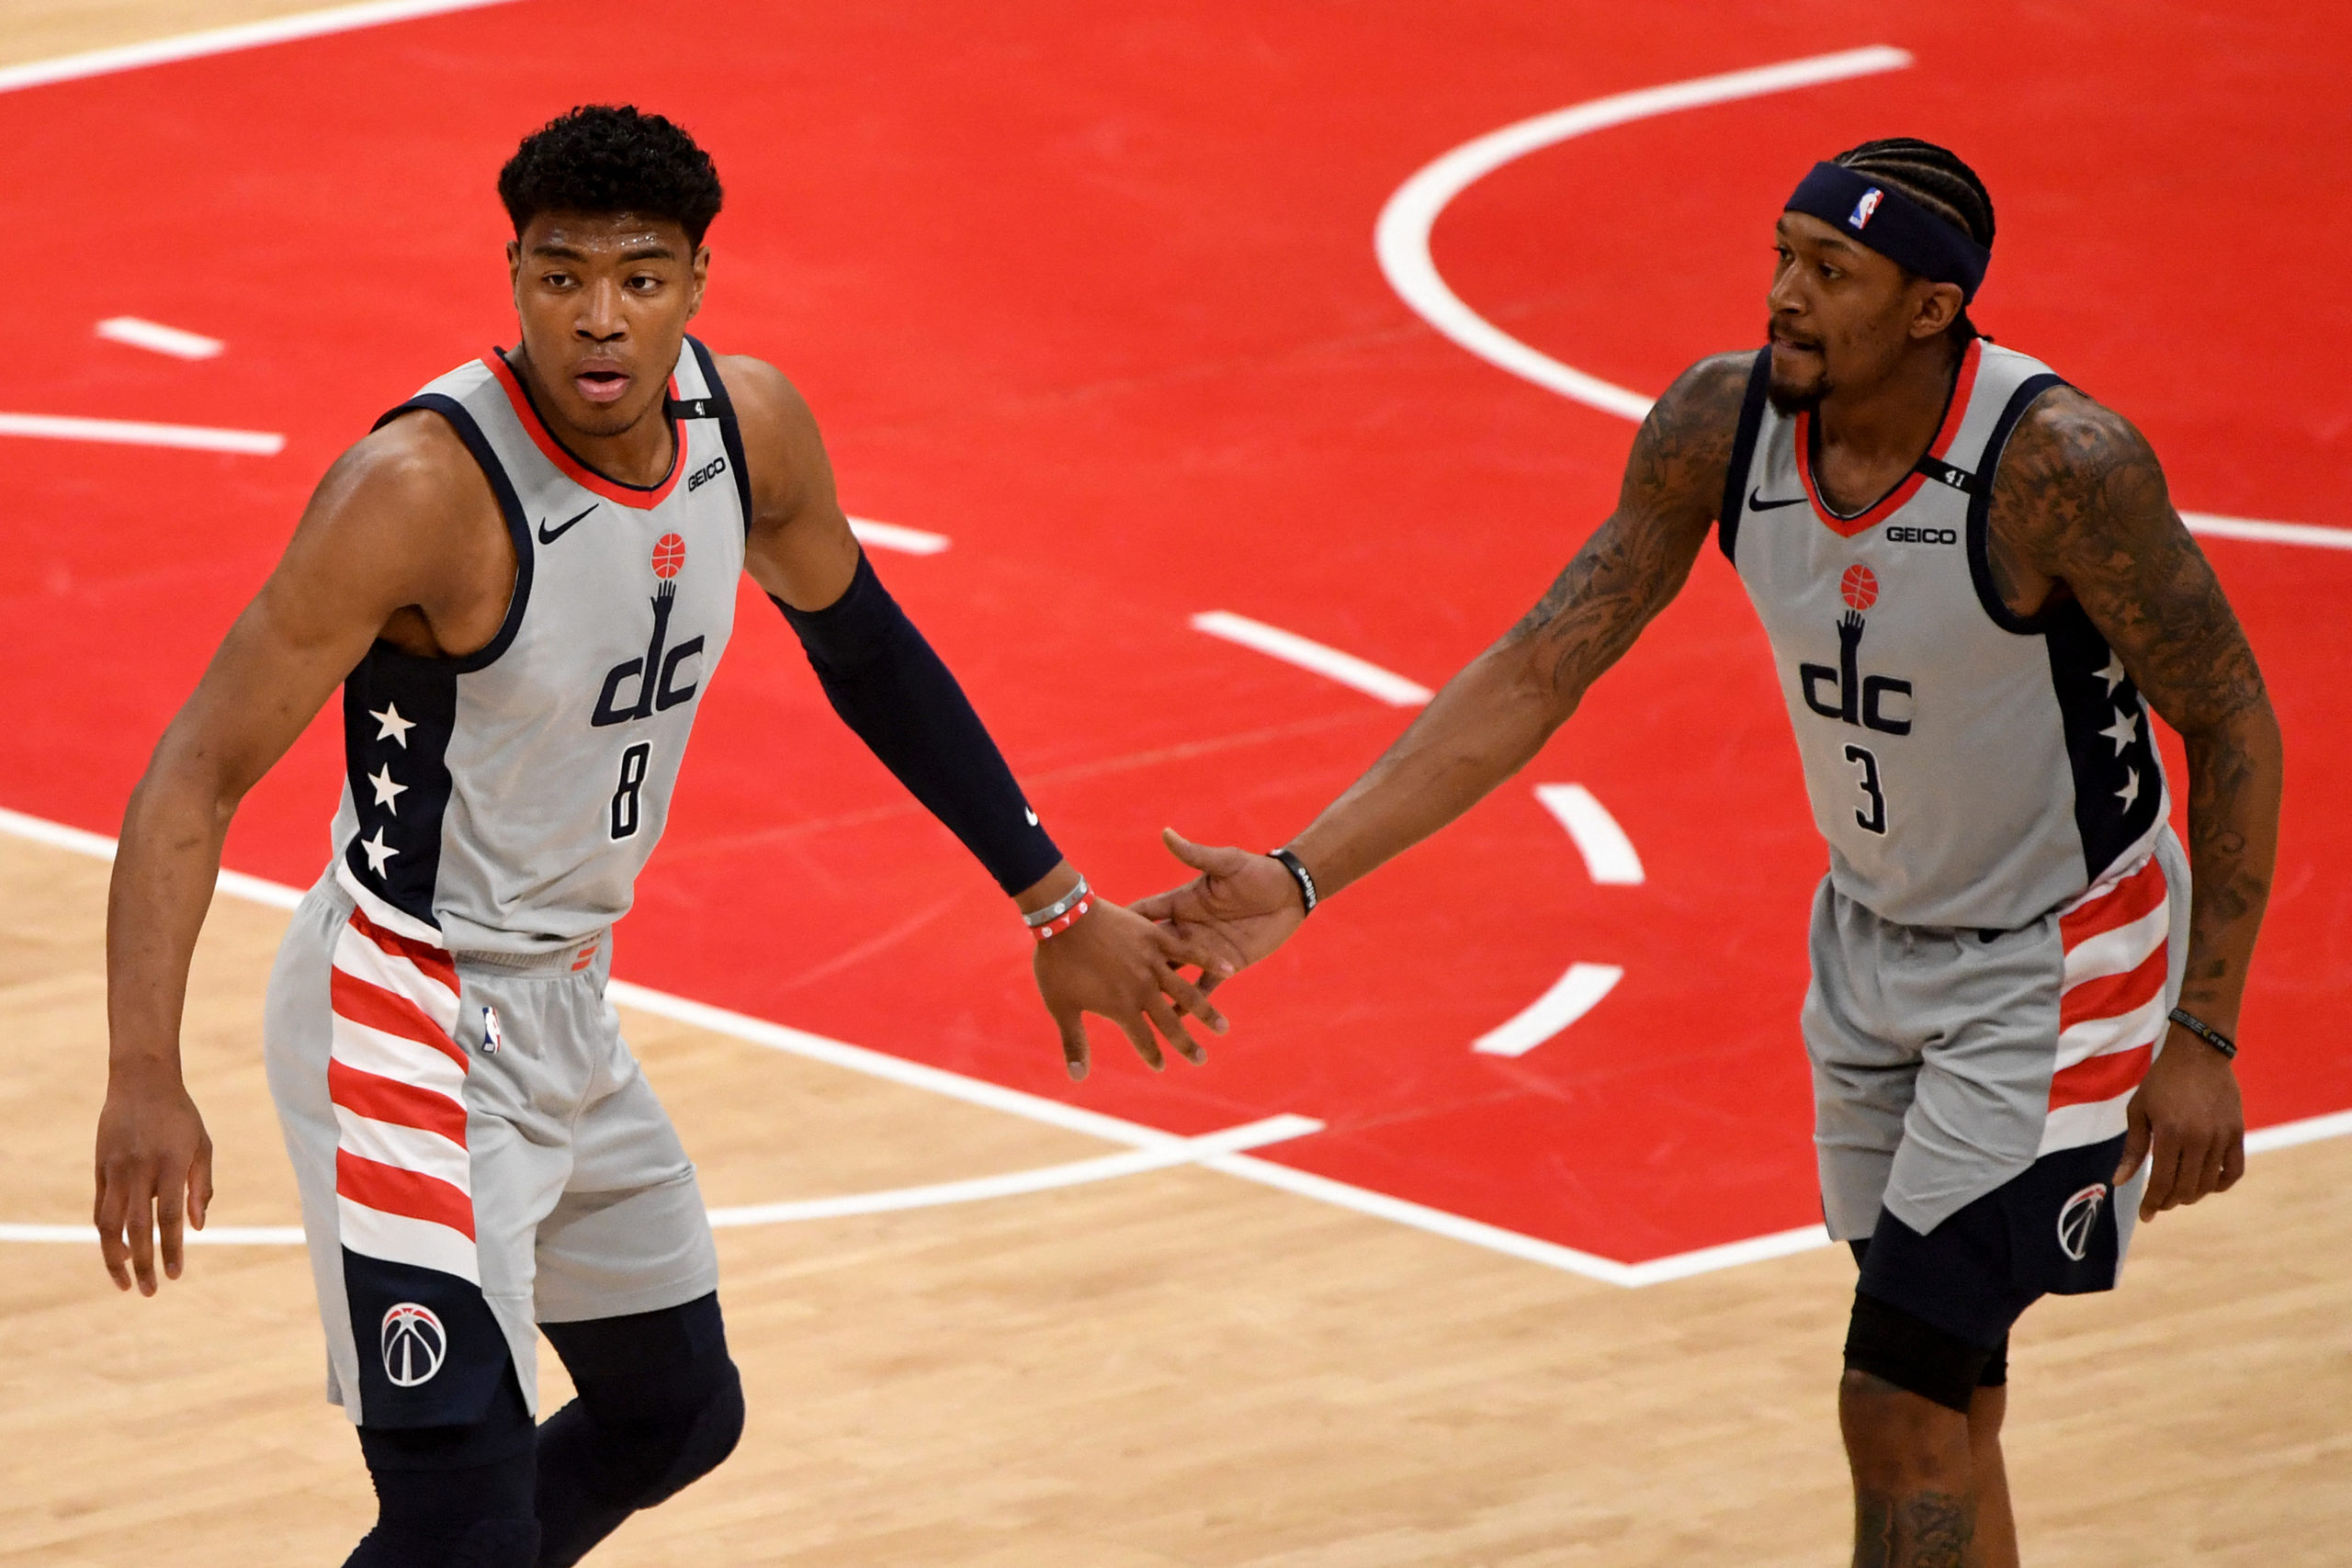 Rui Hachimura #8 and Bradley Beal #3 of the Washington Wizards celebrate after a play against the Indiana Pacers during the first half at Capital One Arena on May 20, 2021 in Washington, DC. NOTE TO USER: User expressly acknowledges and agrees that, by downloading and or using this photograph, User is consenting to the terms and conditions of the Getty Images License Agreement. Will Newton/Getty Images/AFP (Photo by Will Newton / GETTY IMAGES NORTH AMERICA / Getty Images via AFP)